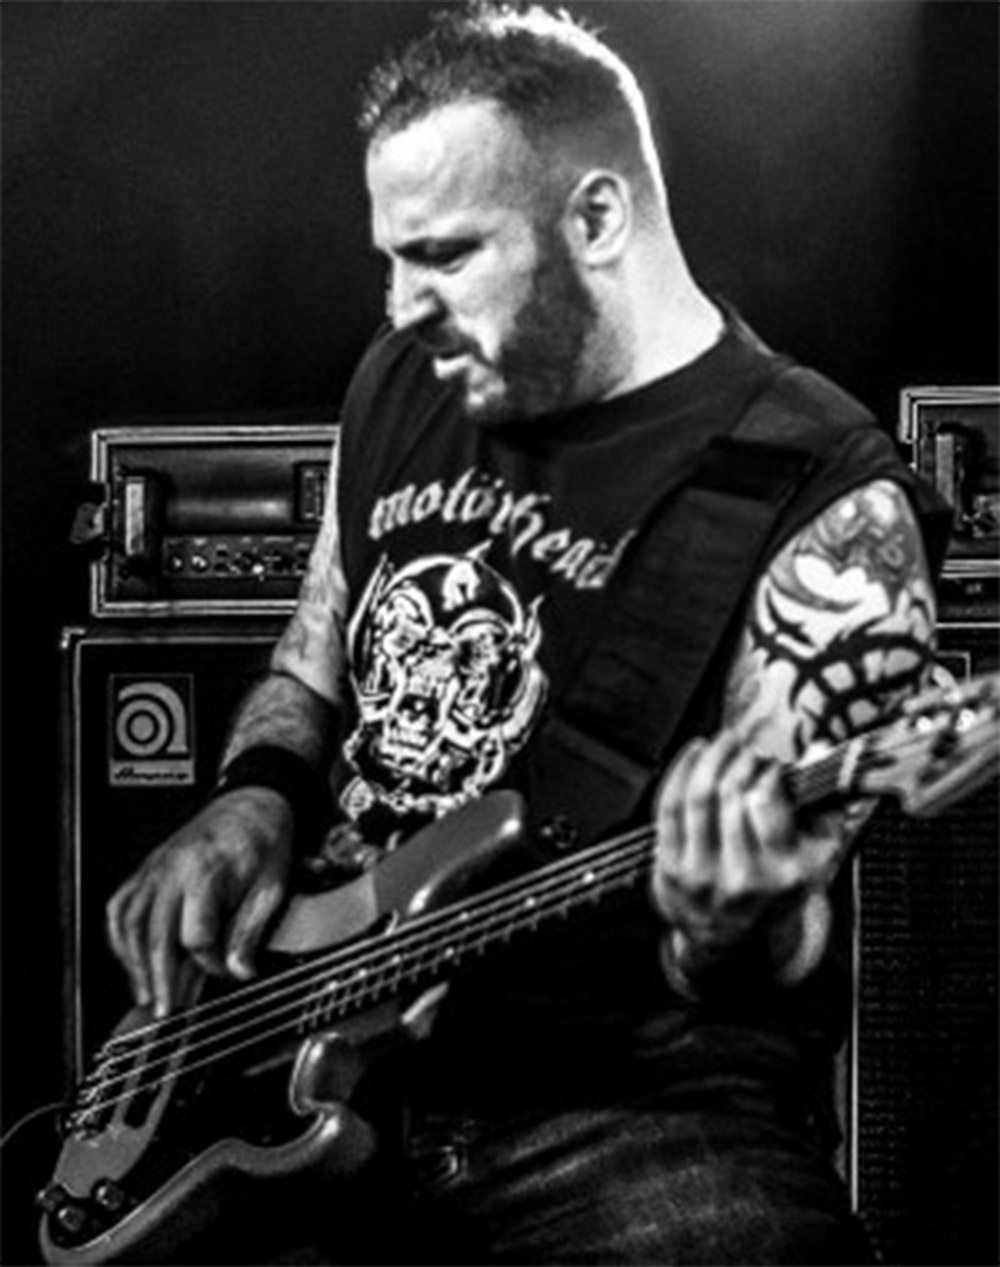 Mark Menghi playing bass on stage